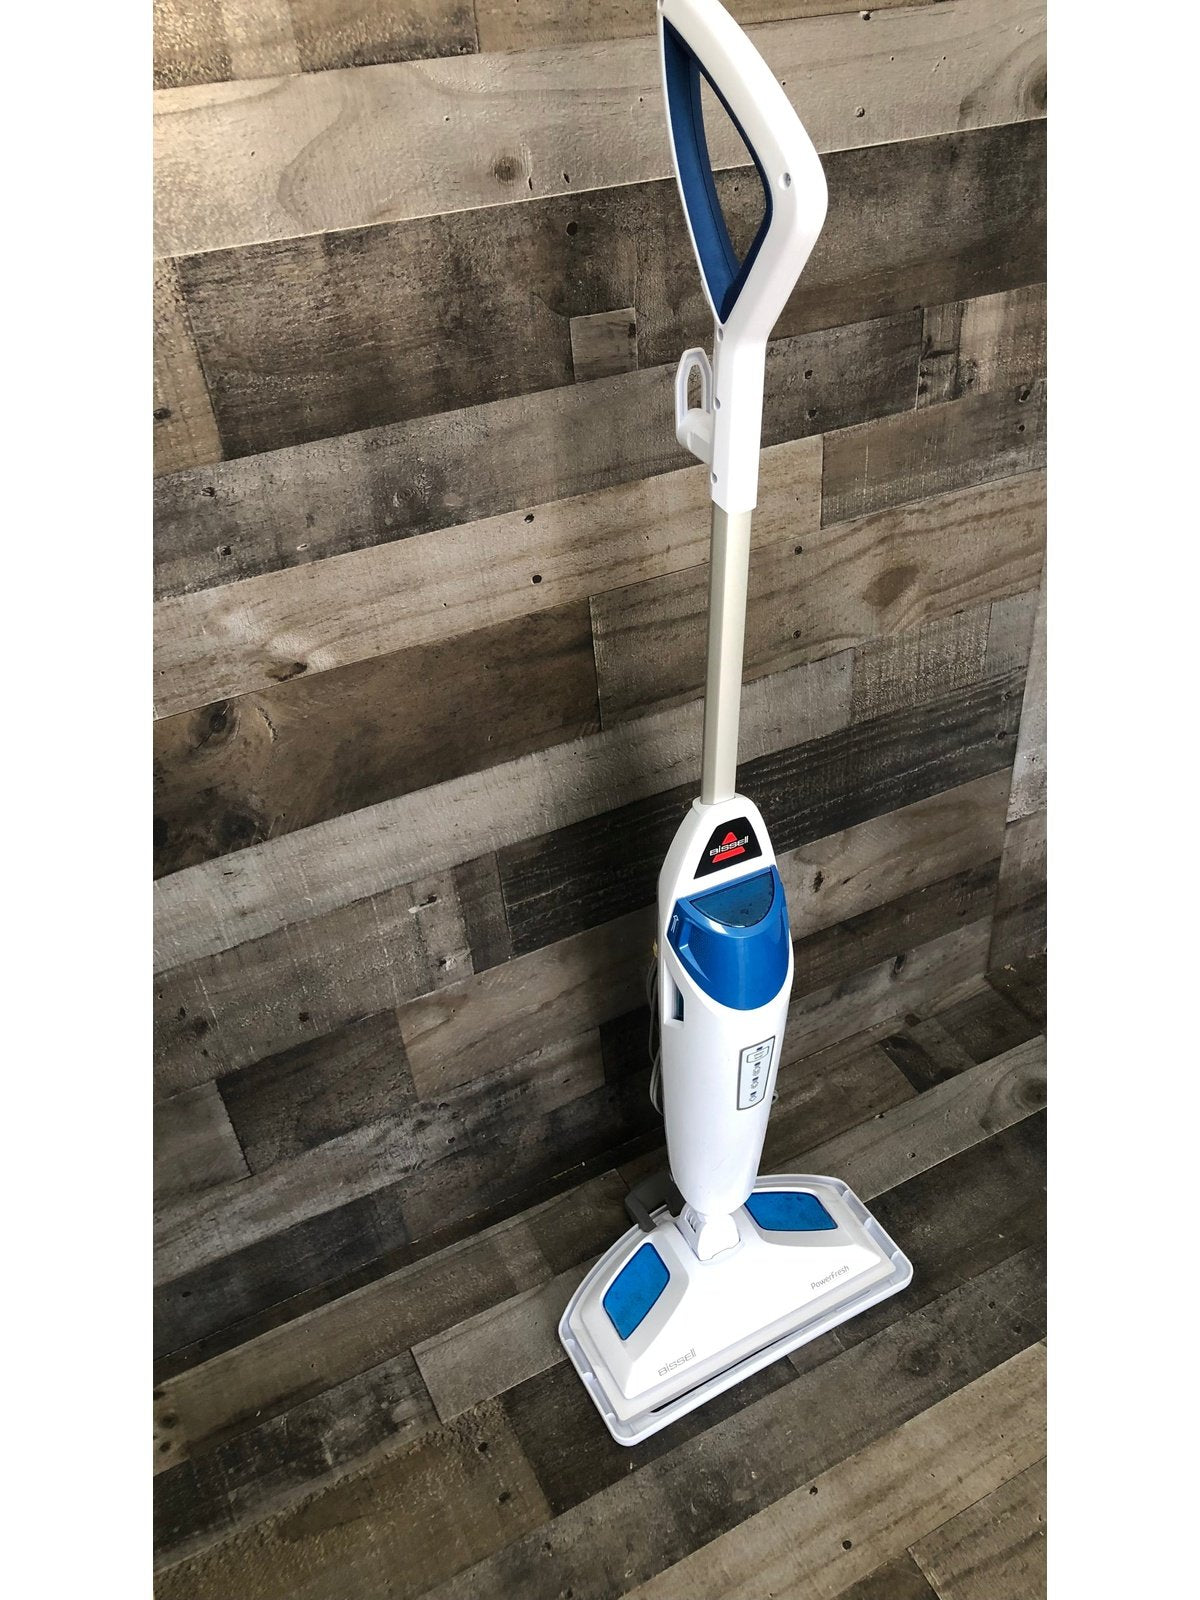 Bissell Power Fresh Steam Mop with Natural Sanitization, Floor Steamer, Tile Cleaner, and Hard Wood Floor Cleaner with Flip-Down Easy Scrubber, 1940A